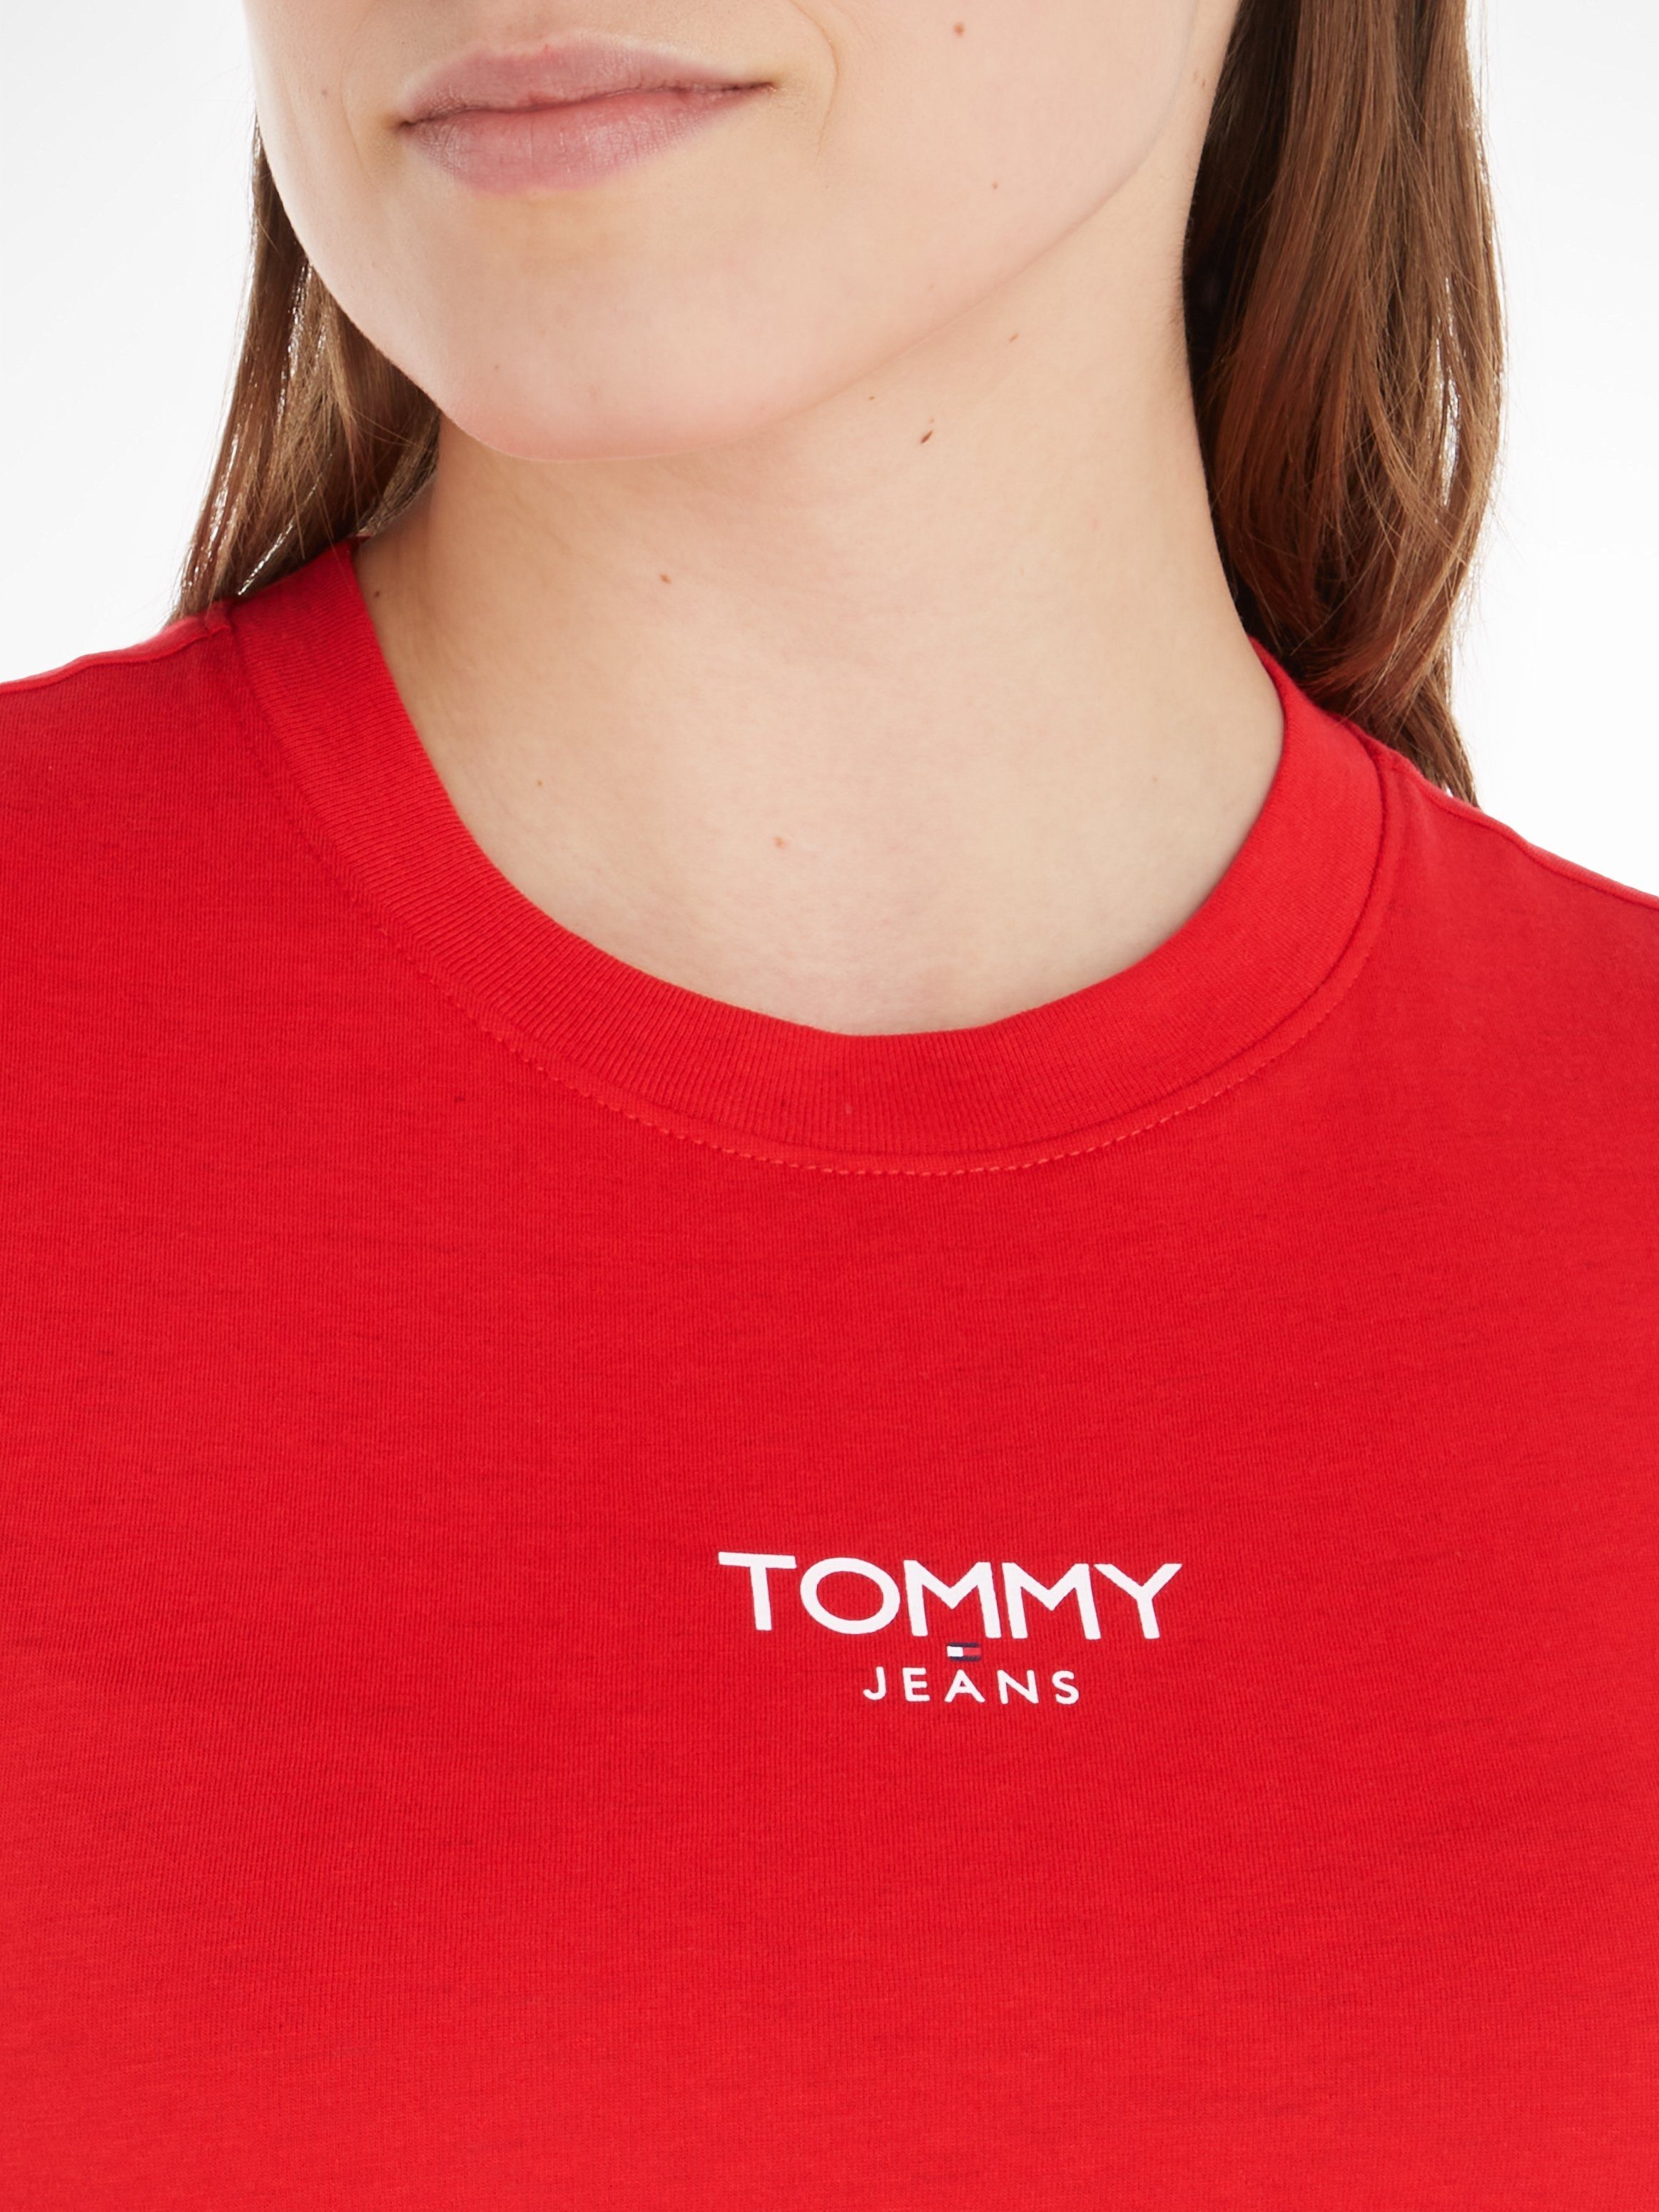 Tommy Jeans SS Jeans Logo T-Shirt mit ESSENTIAL 1 Crimson Deep BBY TJW Tommy LOGO